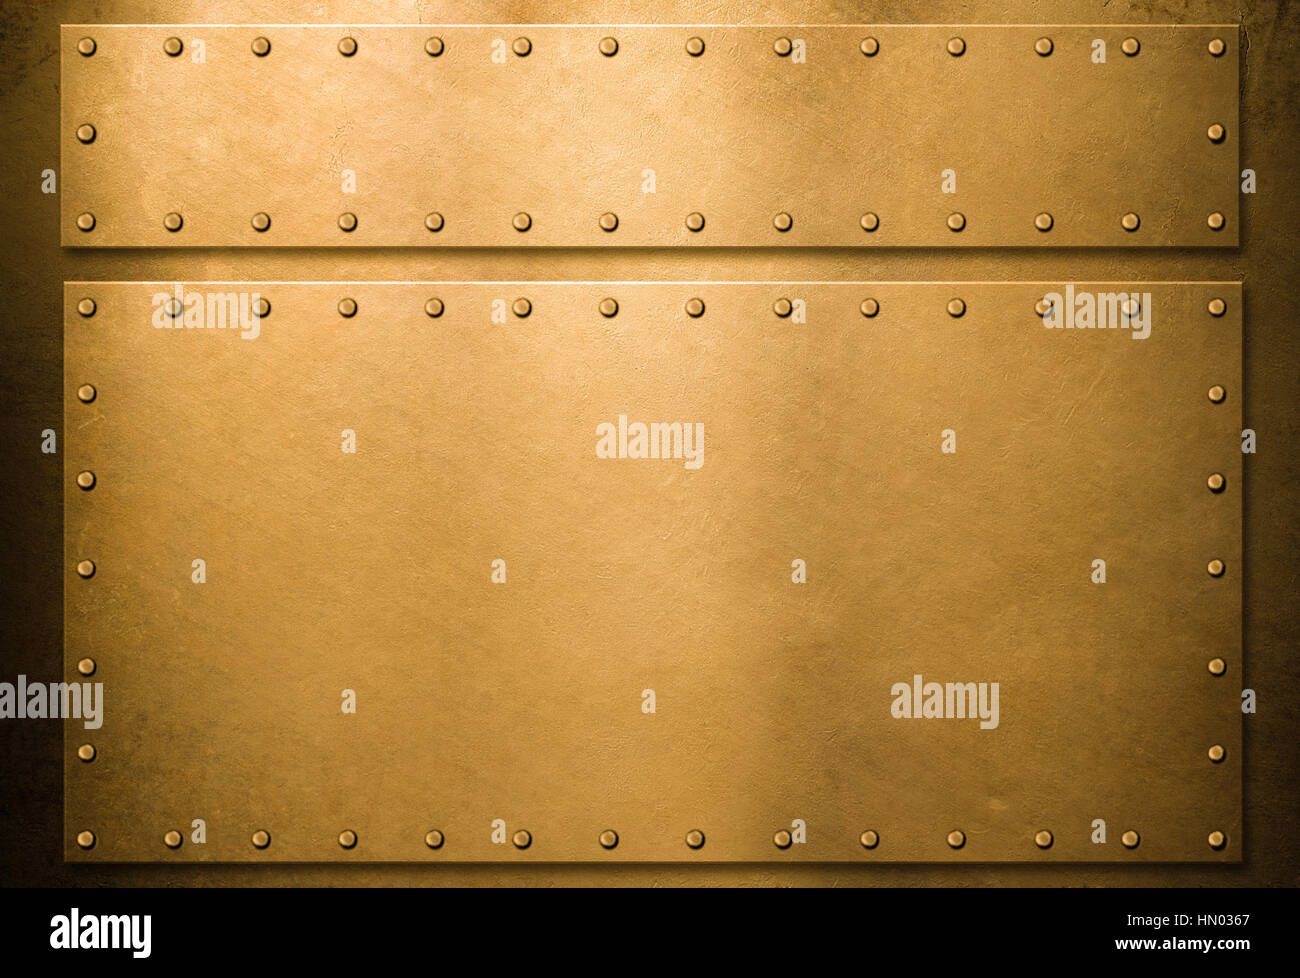 Gold metal plates with rivets template Stock Photo